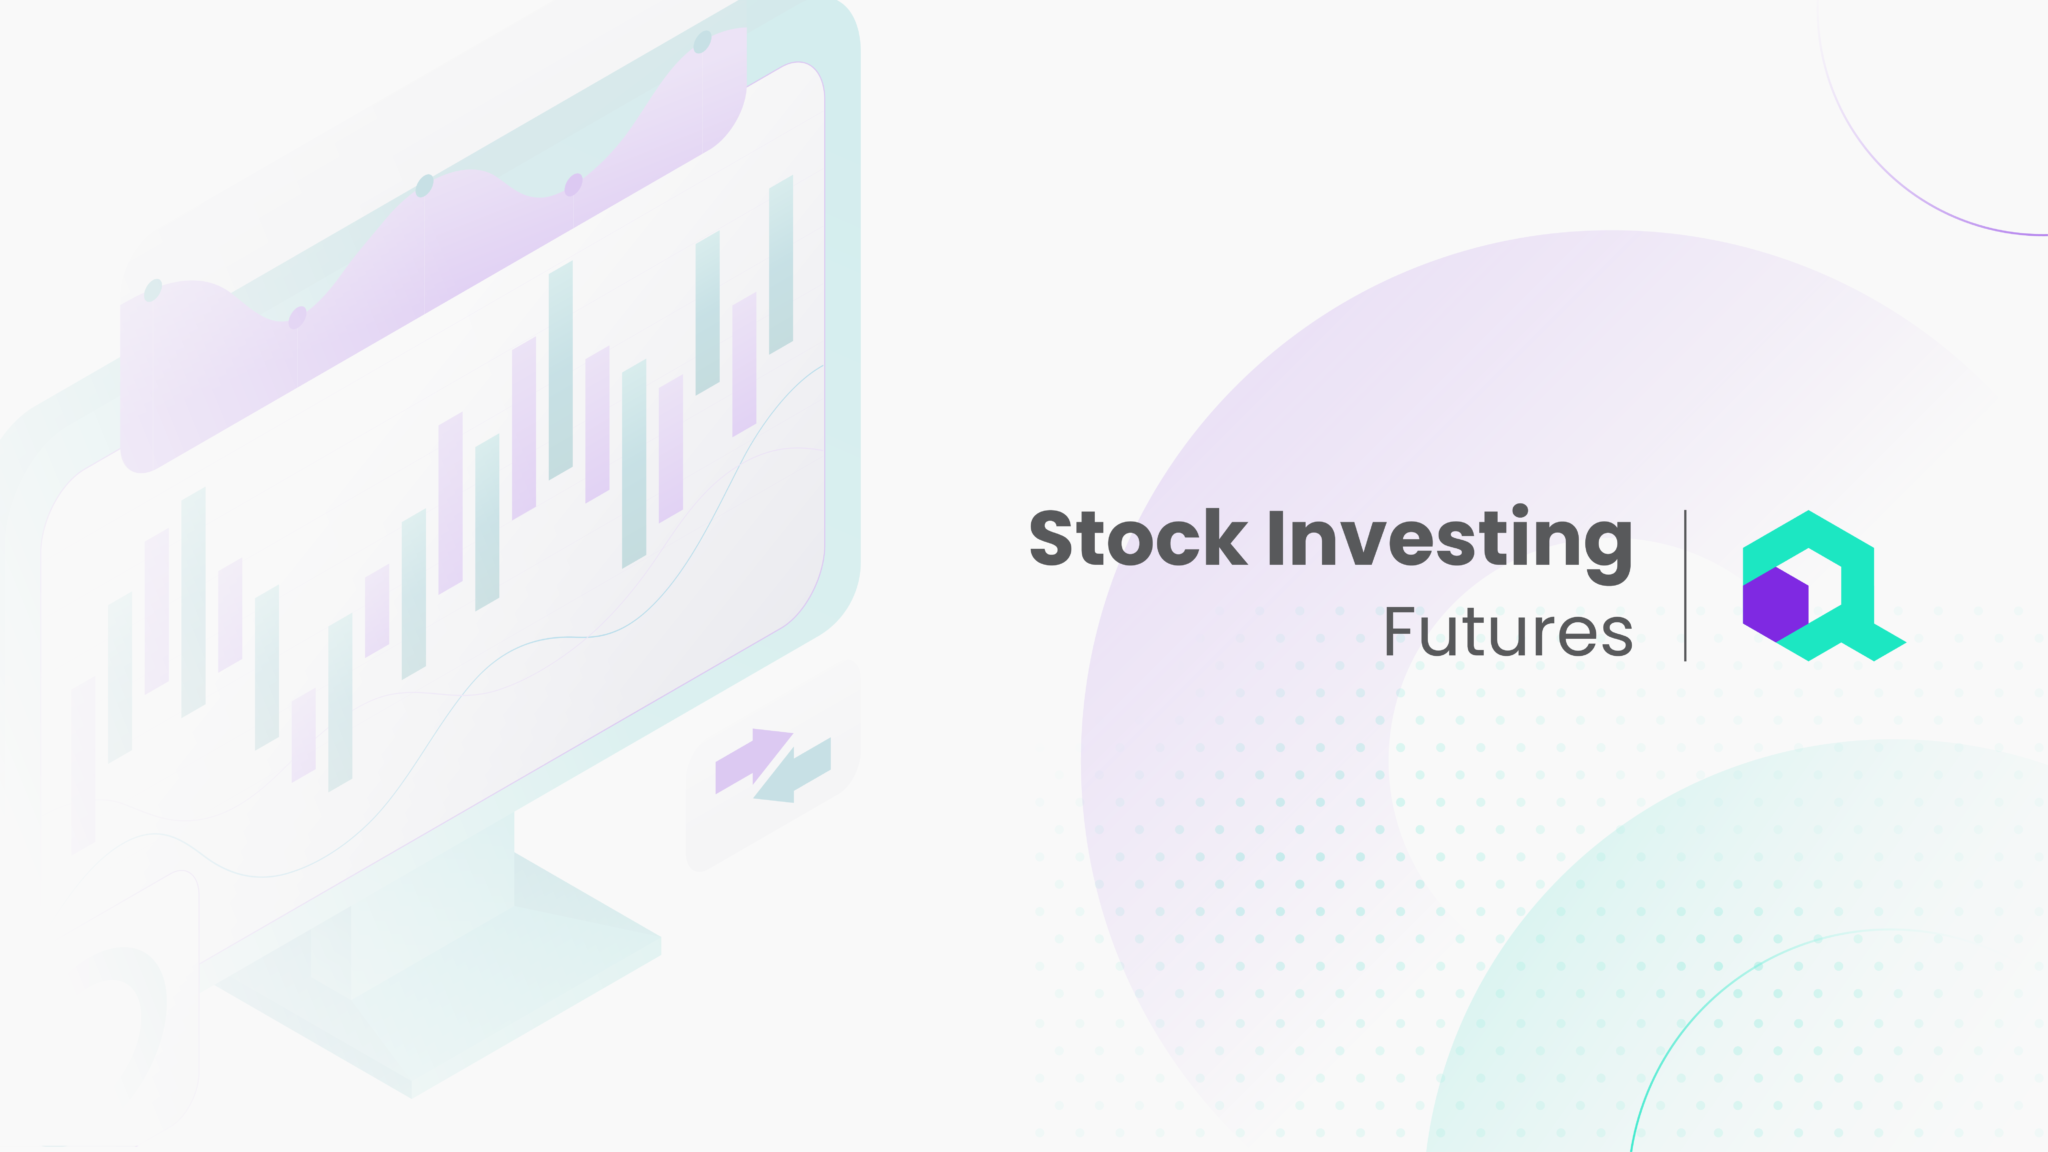 Stock Investing Futures: Strategies for Long-Term Success